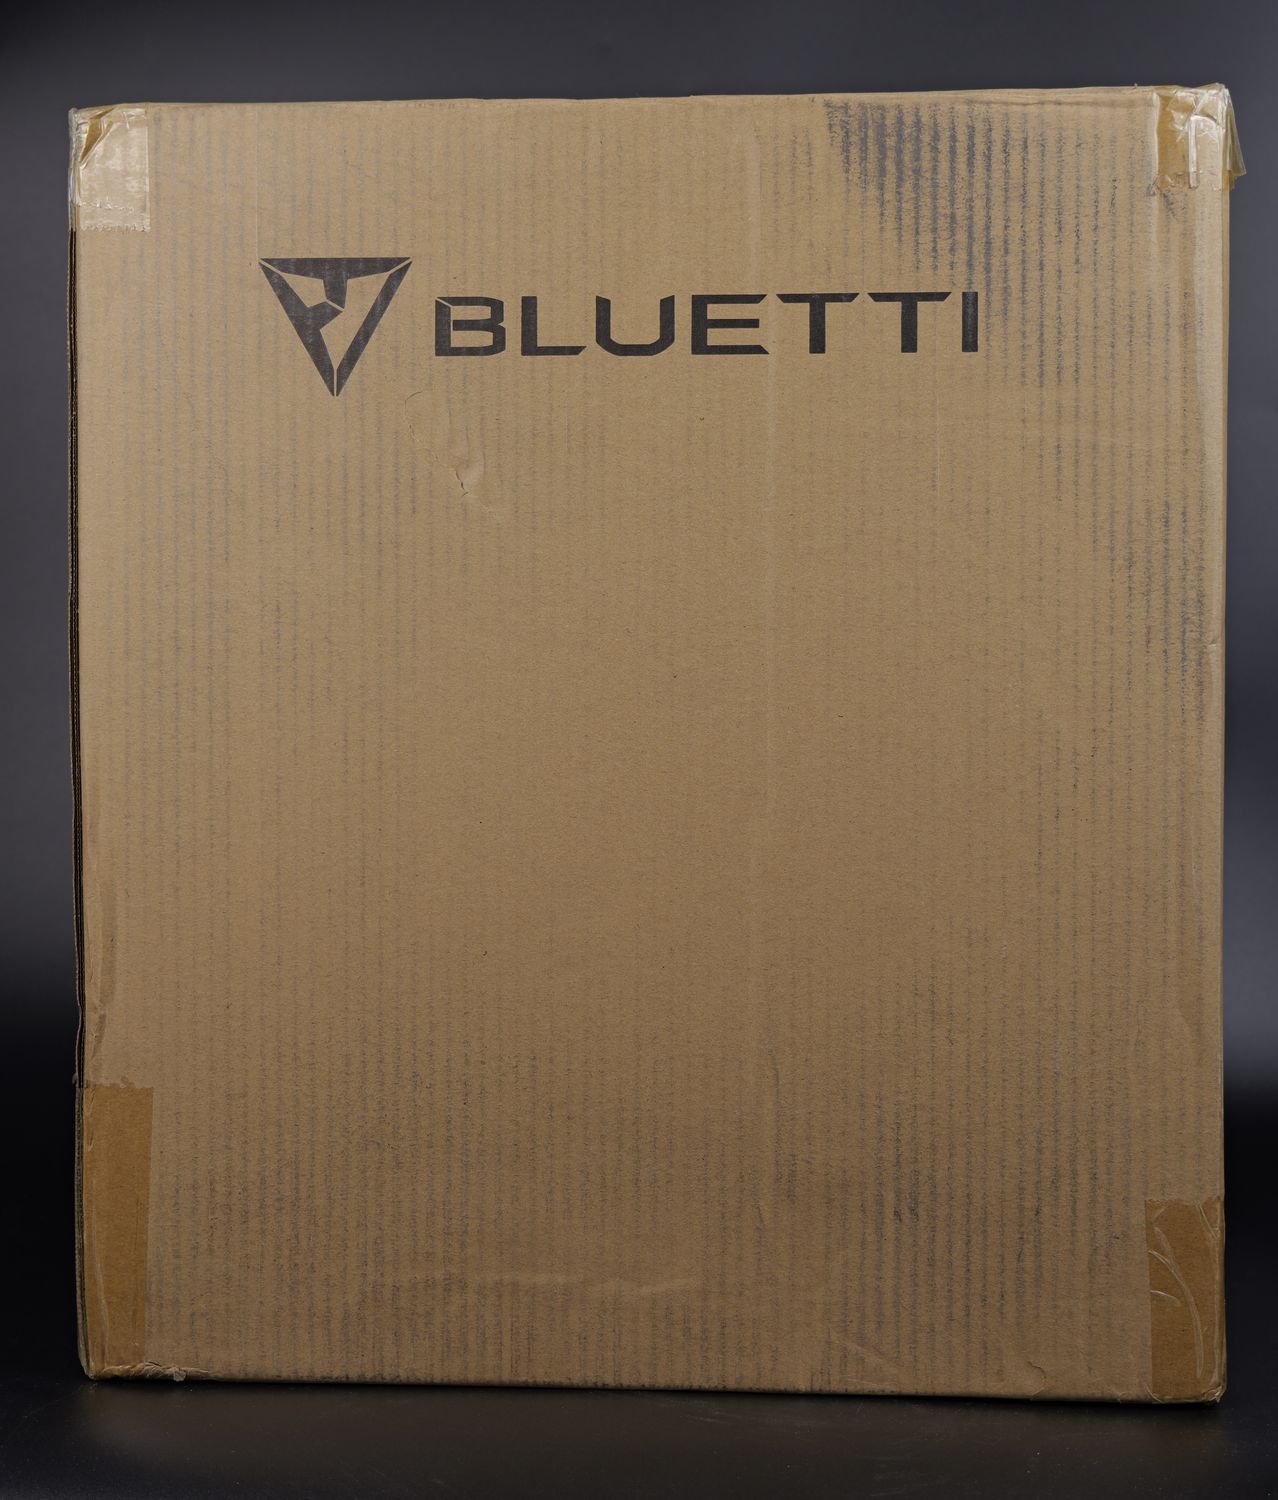 BLUETTI AC180 Review Packaging1 | BLUETTI AC180 Portable Power Station Review